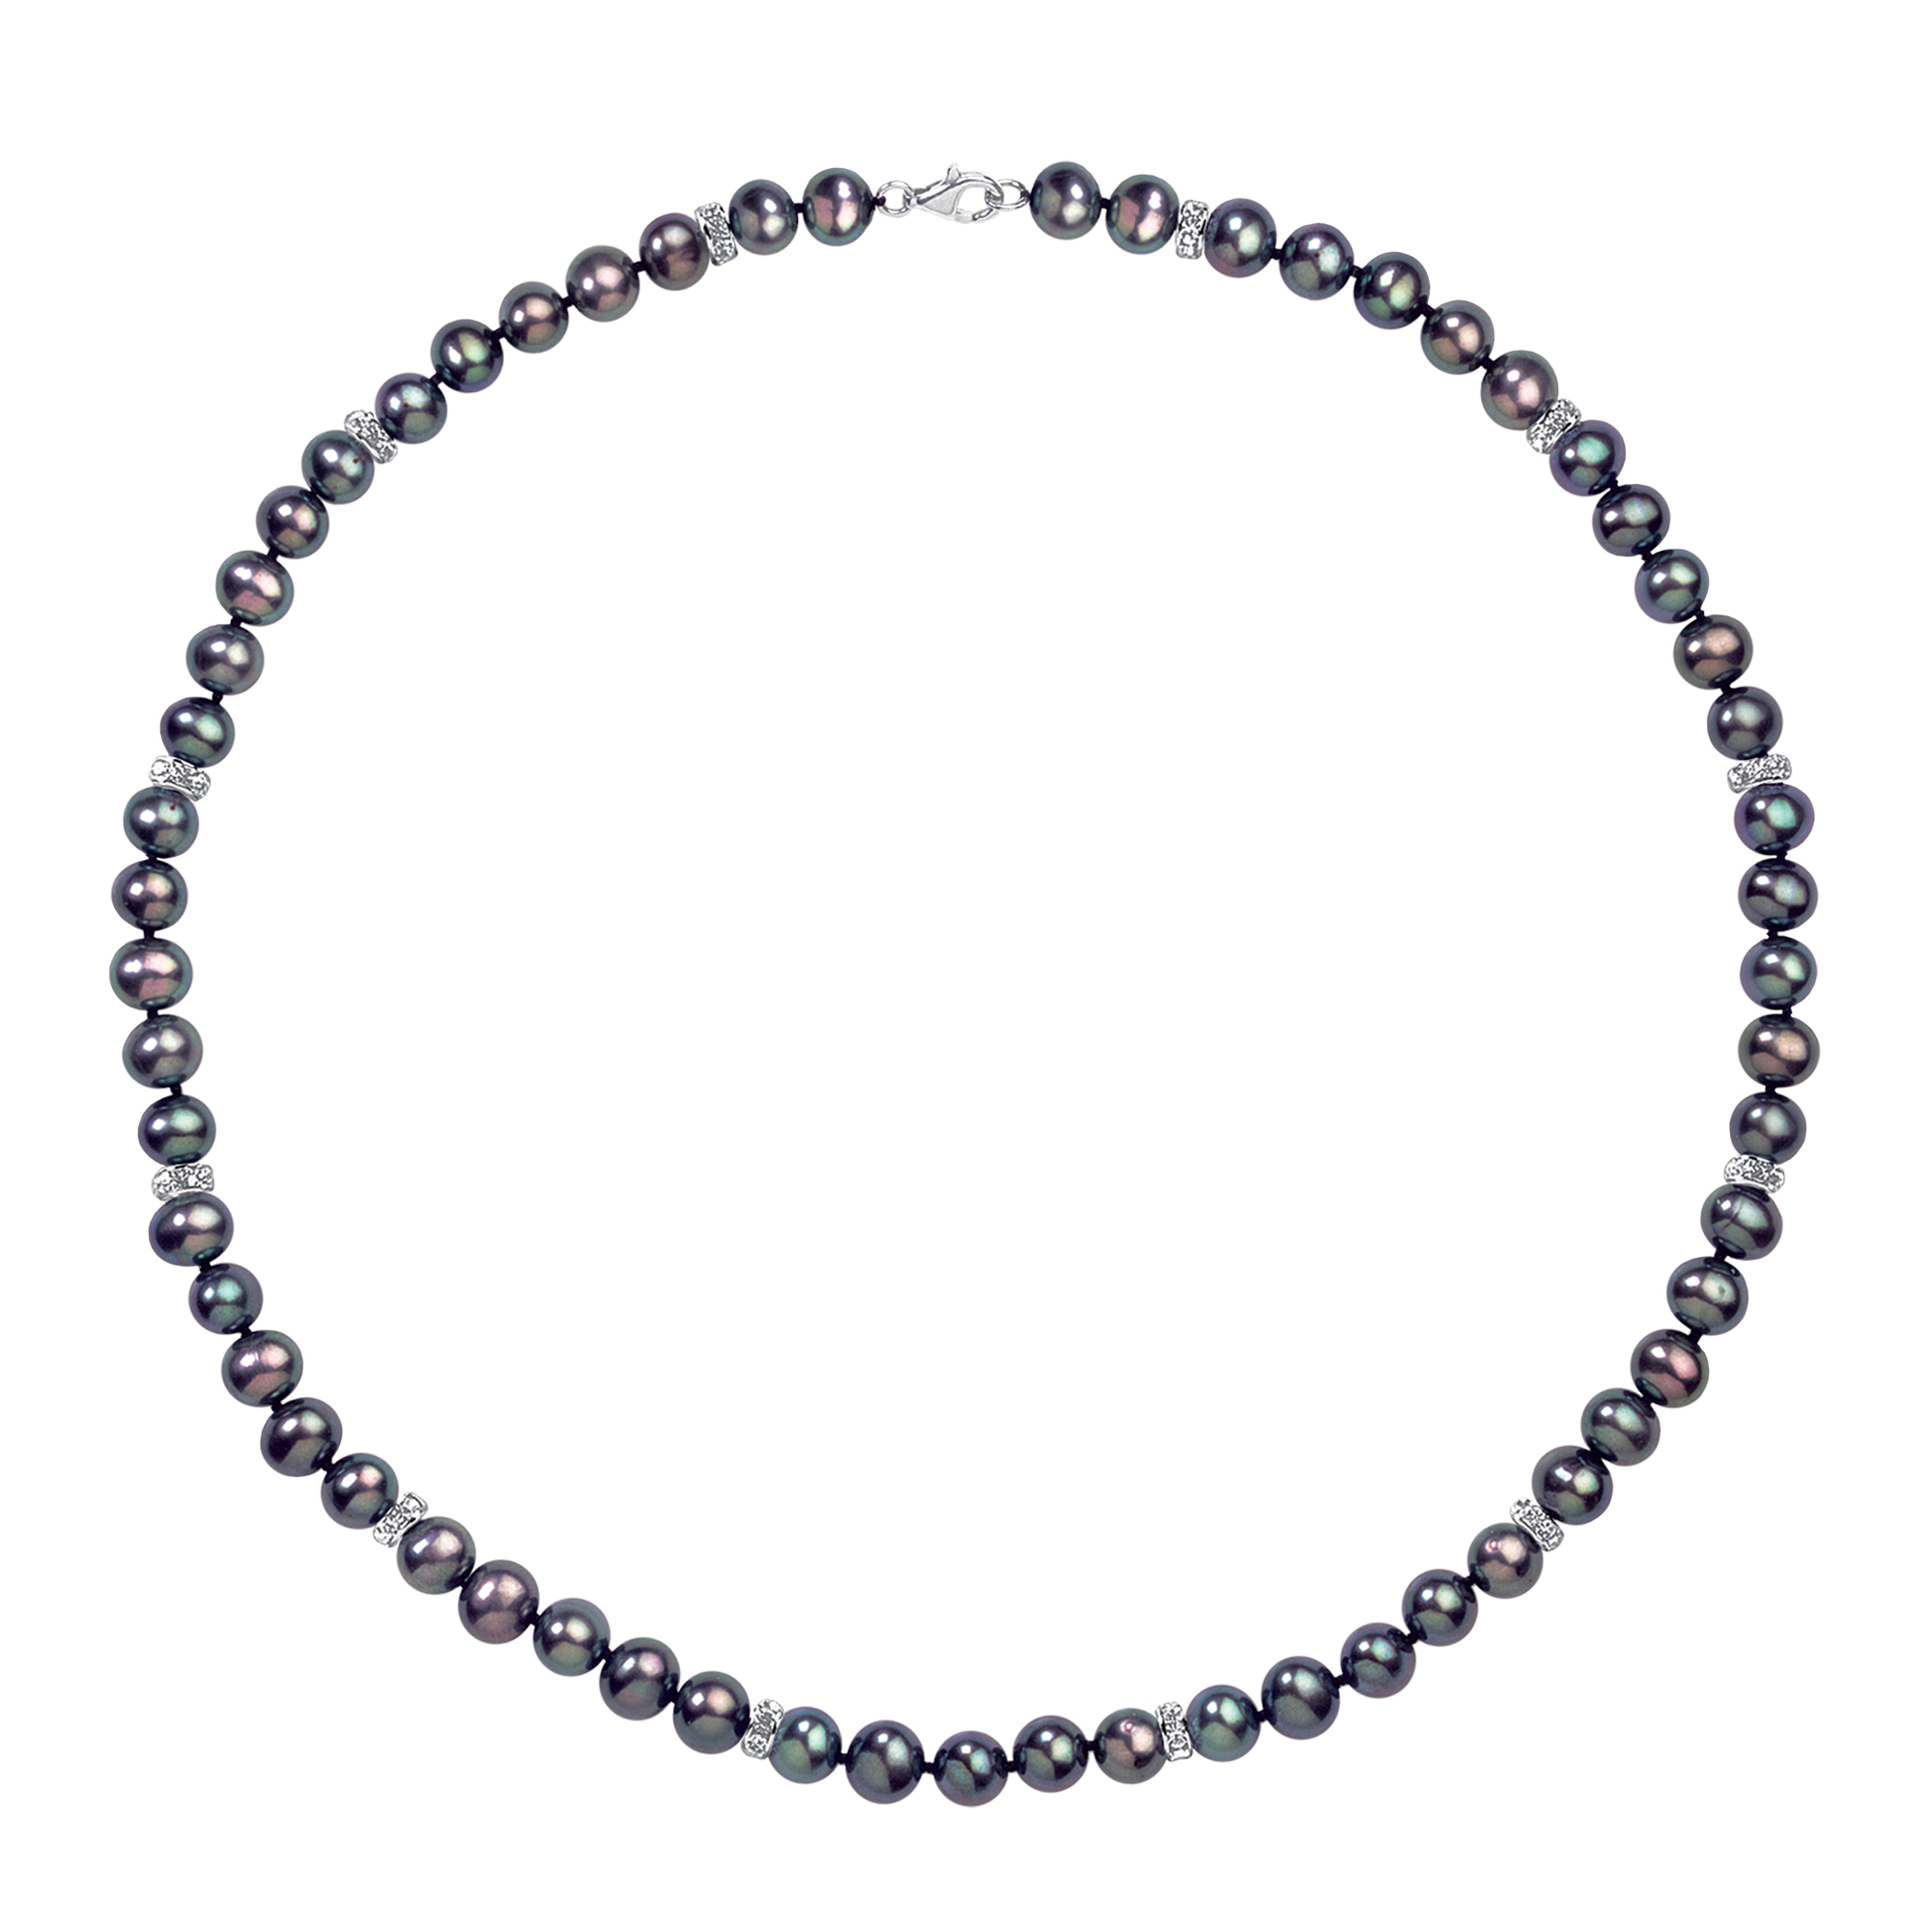 Midnight Spell Black Pearl Necklace with FREE Bracelet 1333 0311 a main